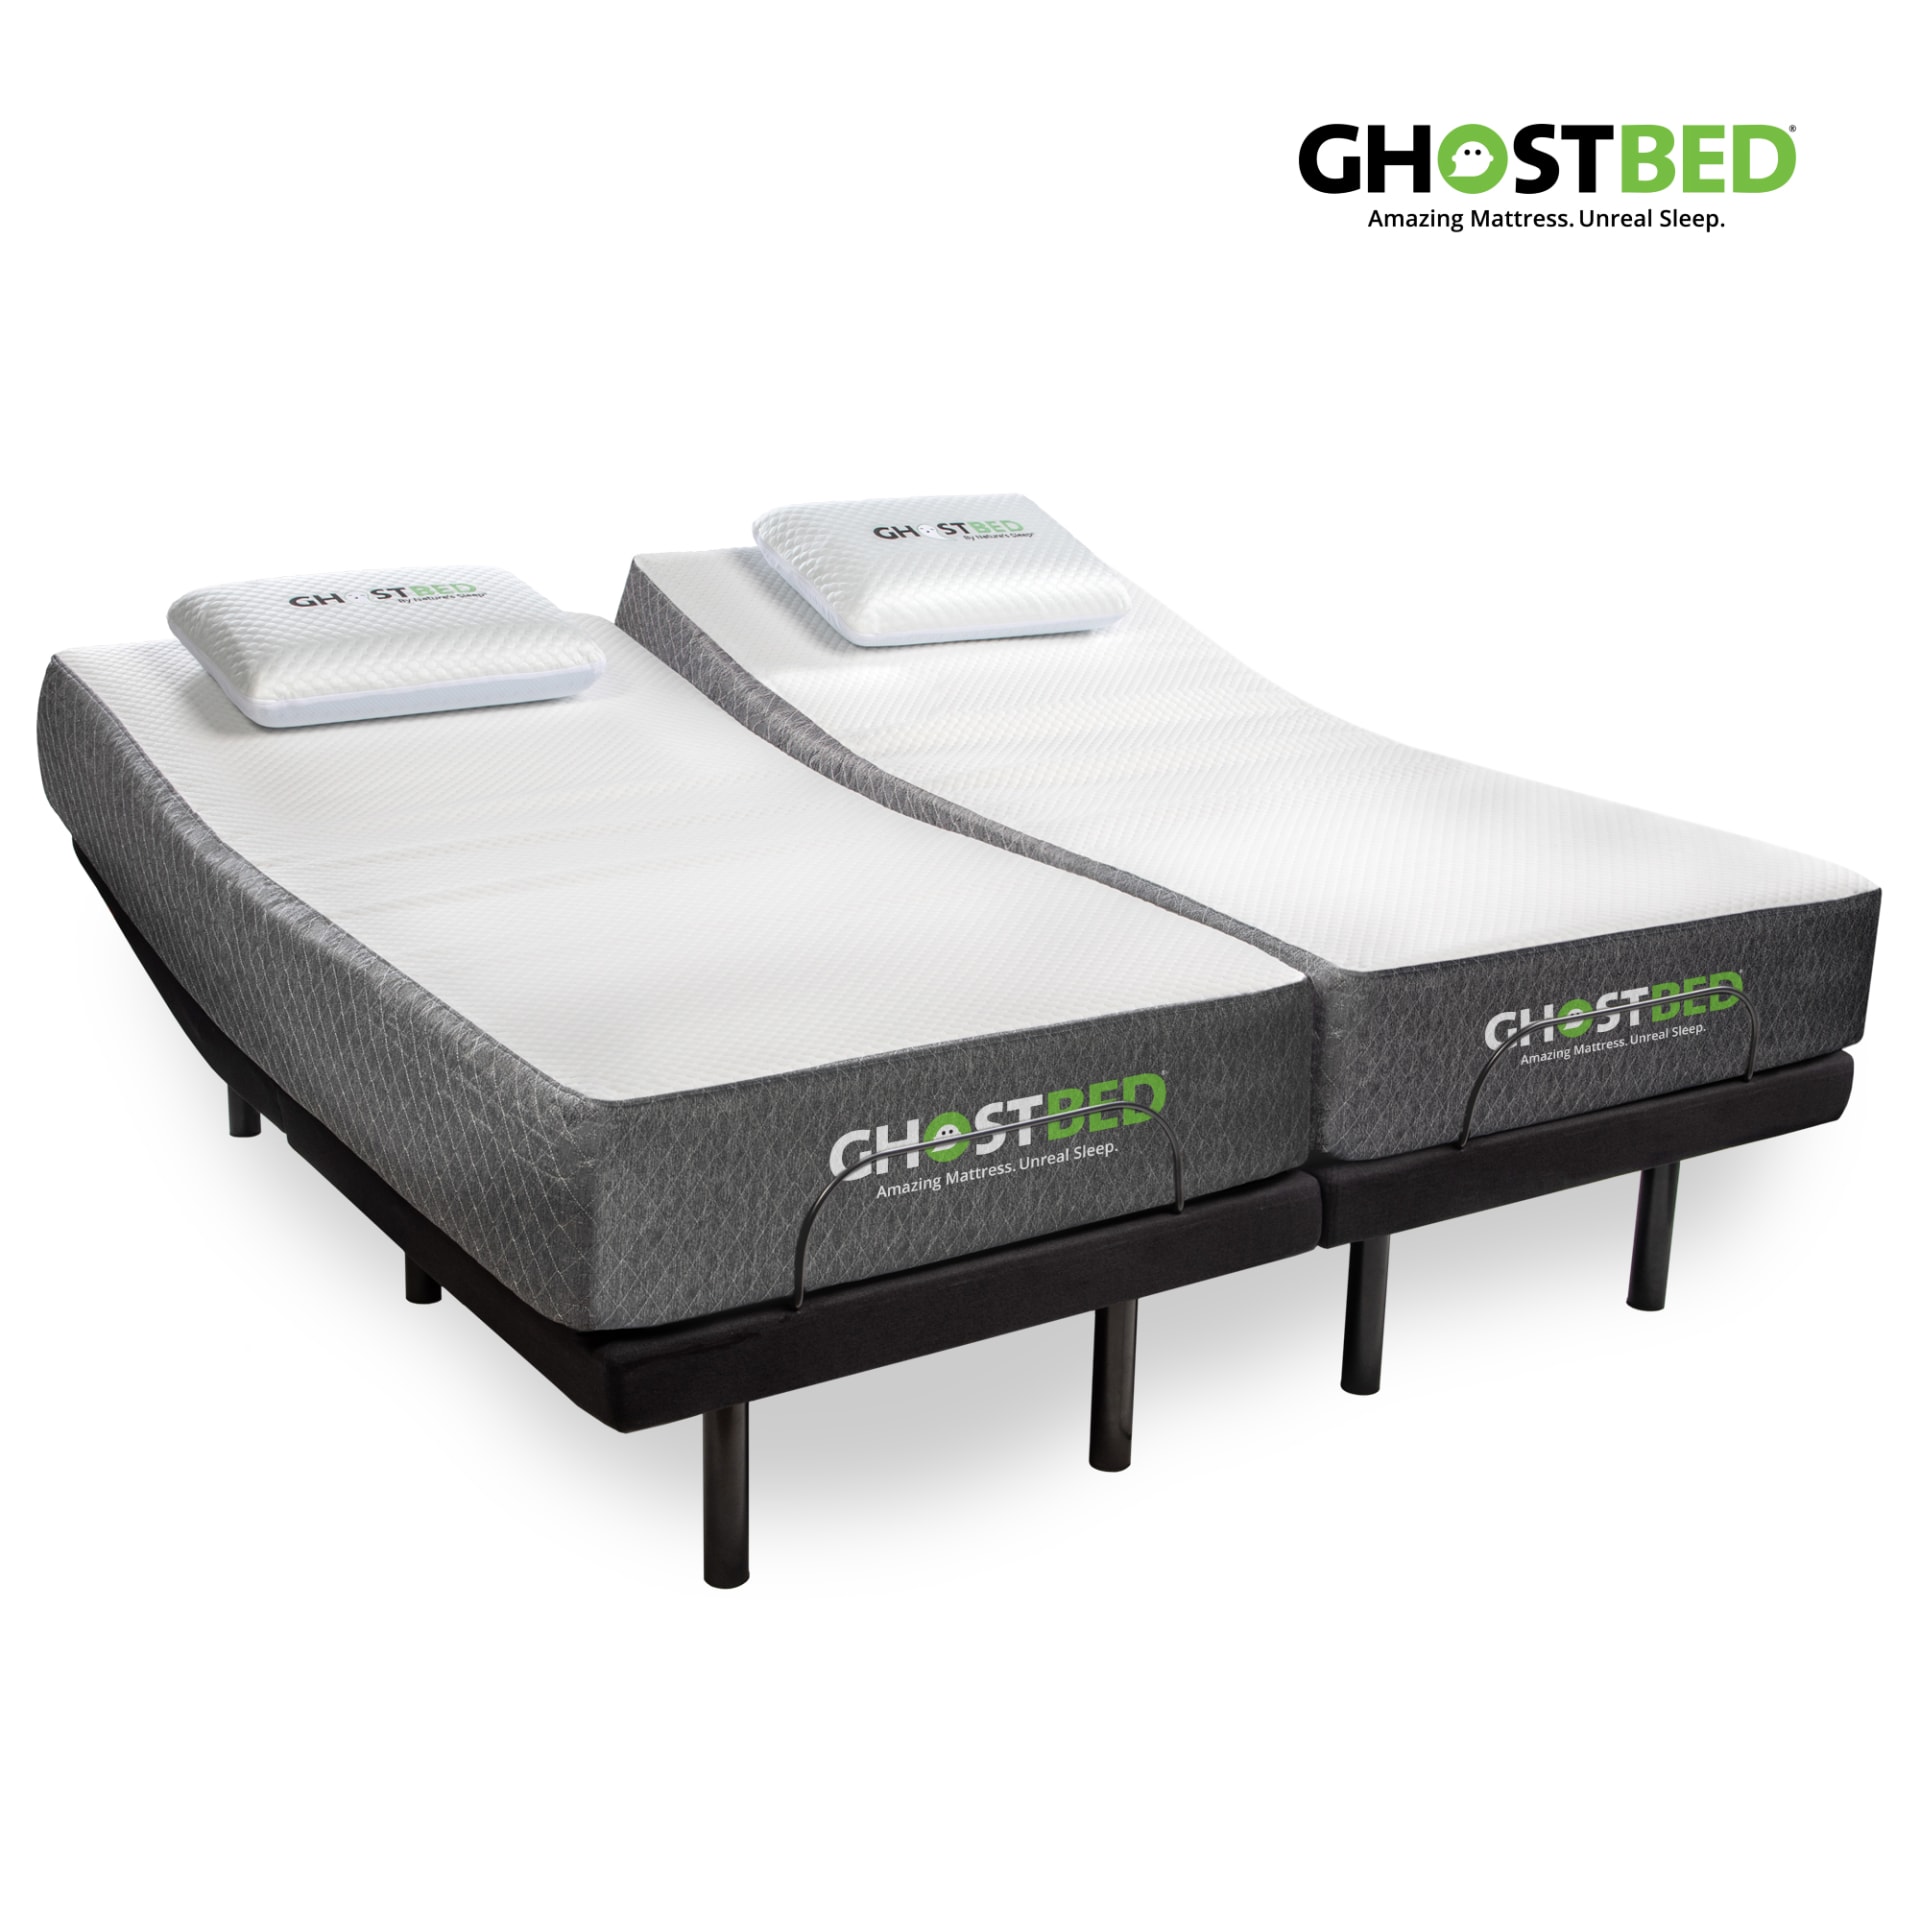 Ghostbed 11 Memory Foam Mattress With, King Size Bed Frame For Adjustable Base